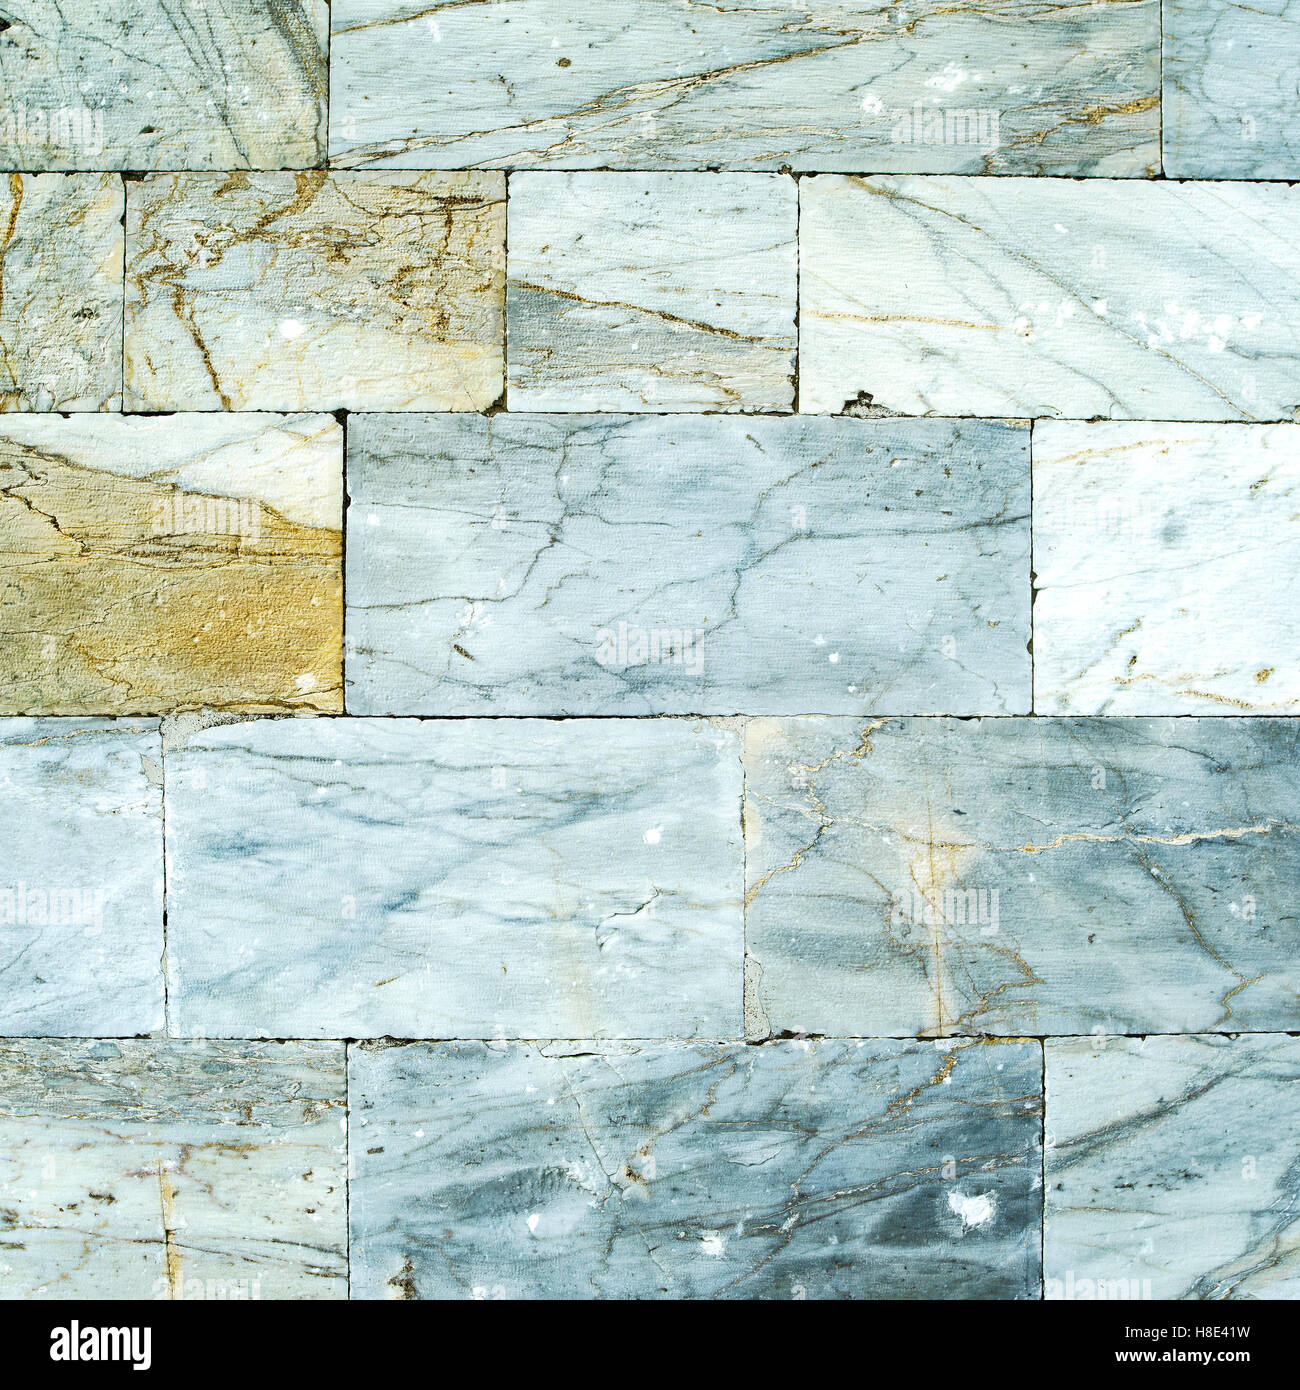 Marble aged surface floor or wall. High resolution texture and pattern. Stock Photo